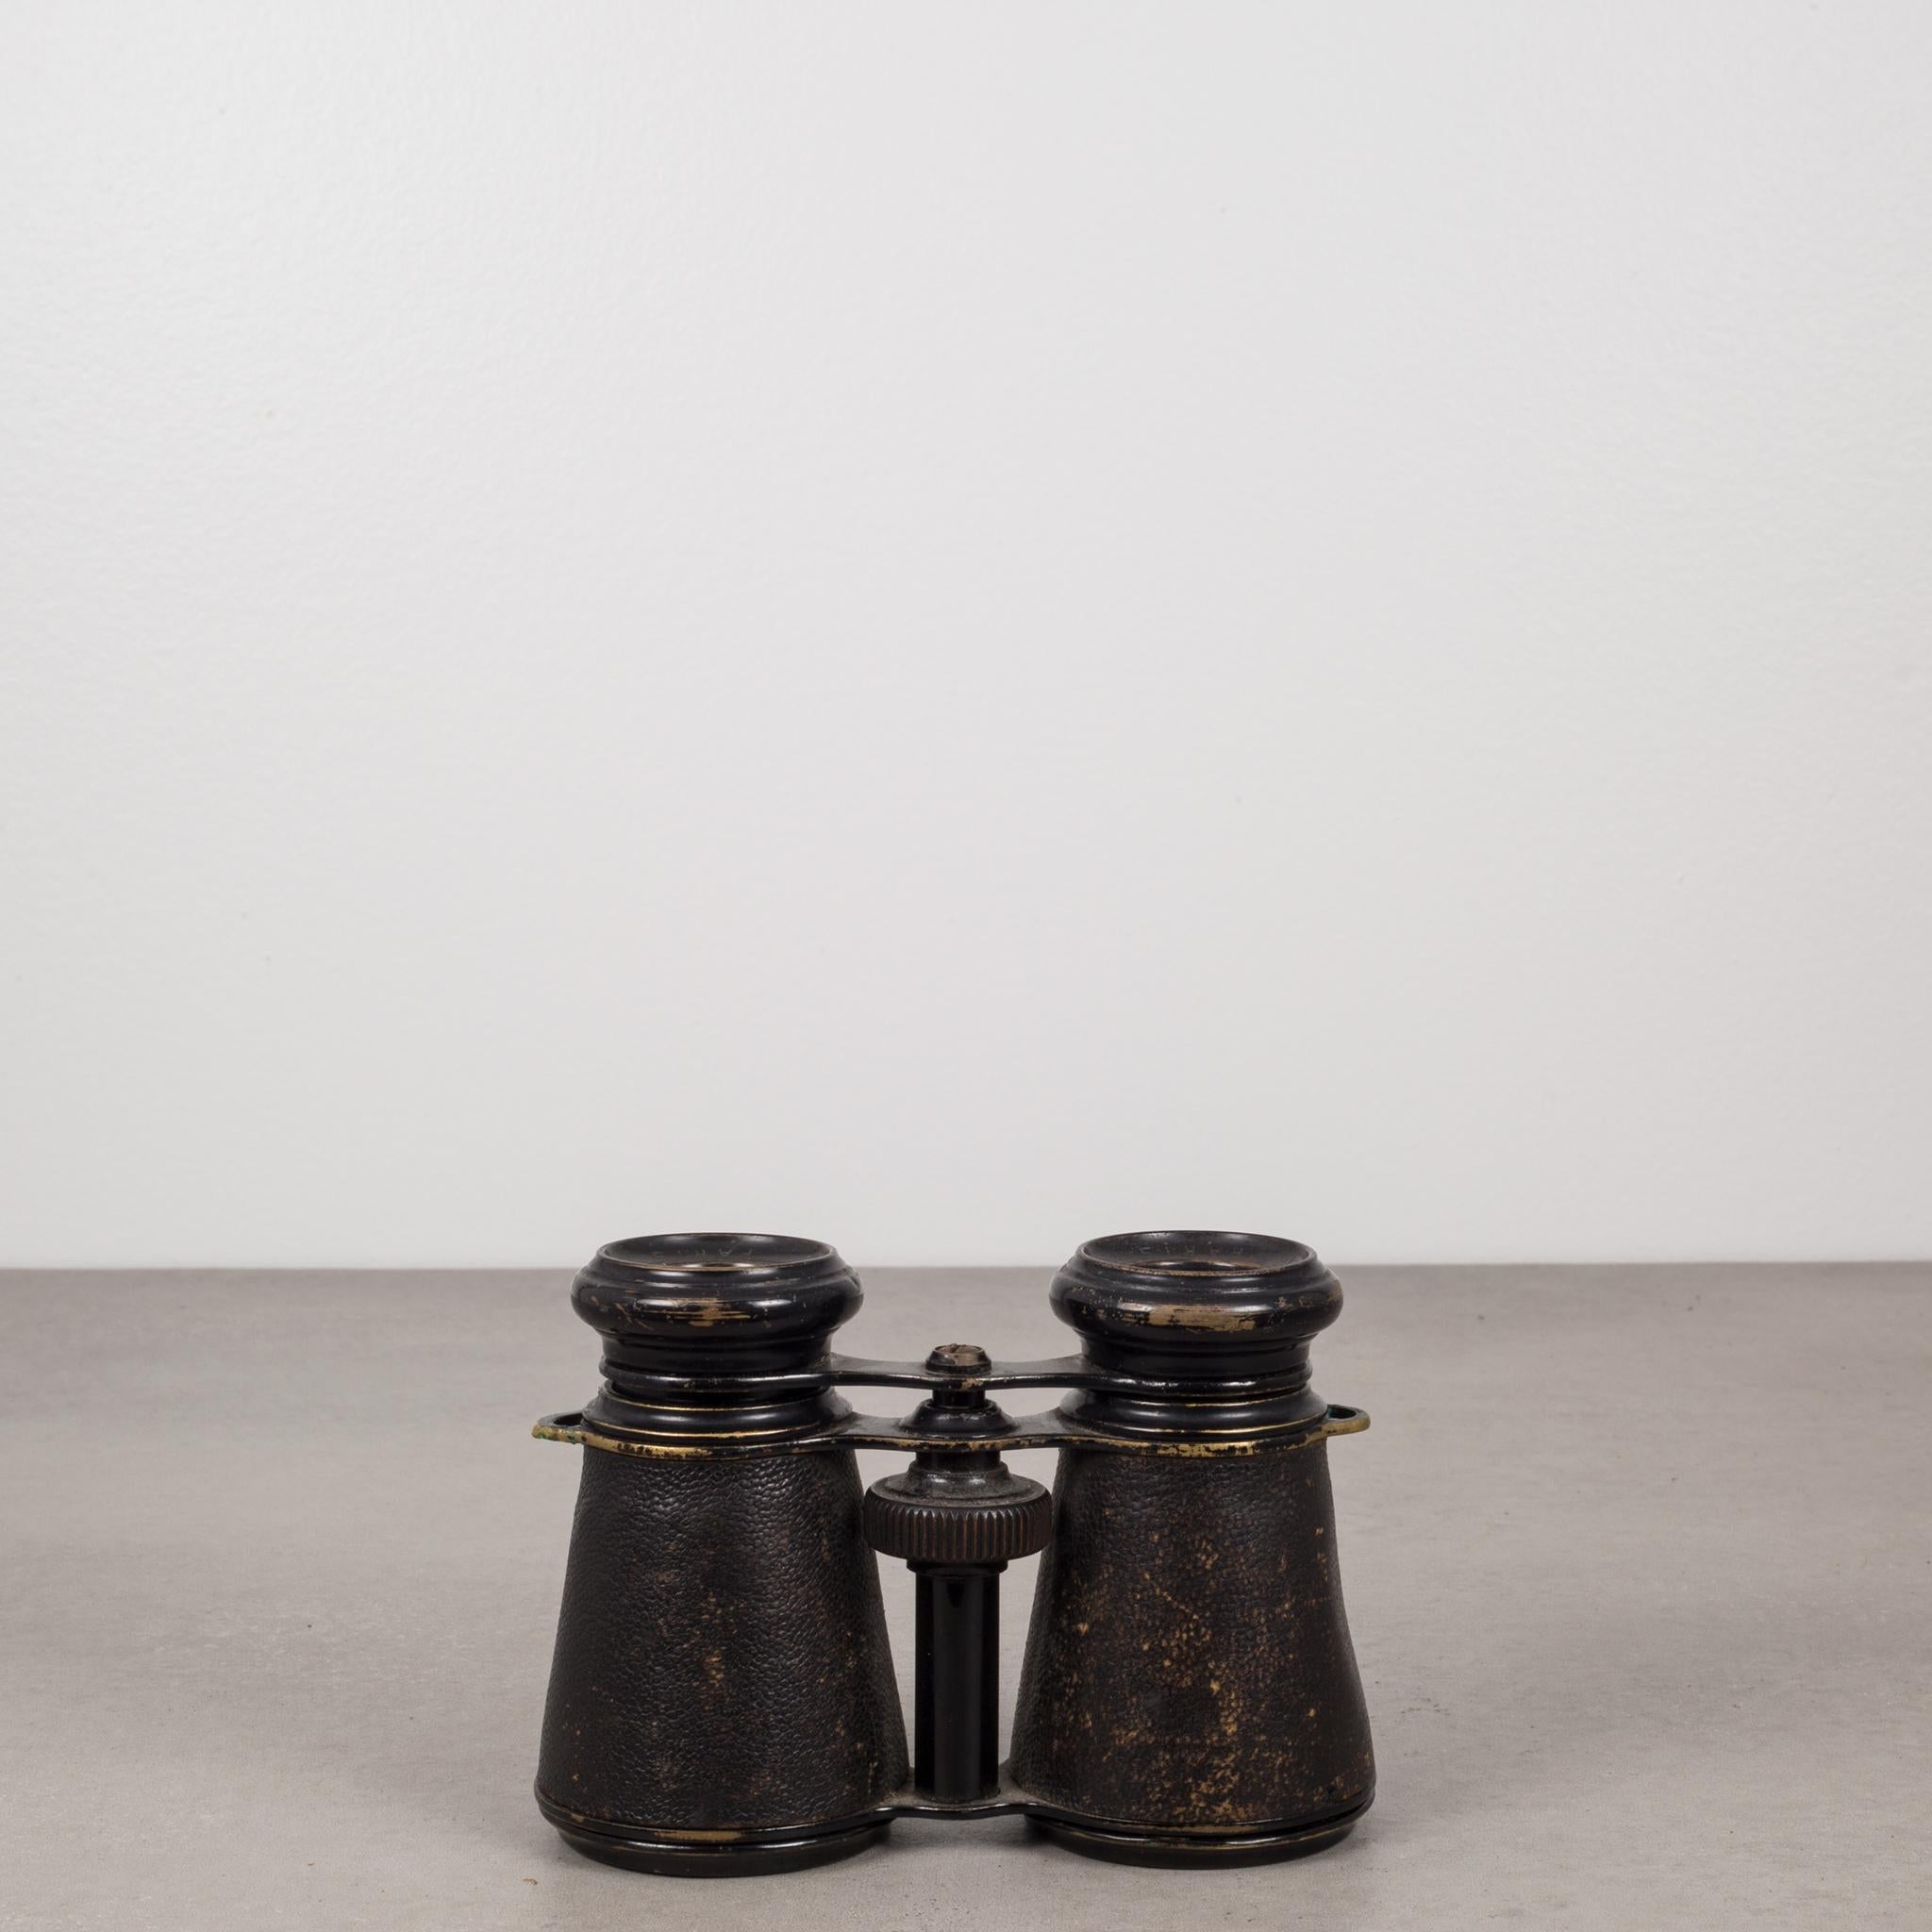 This is an original pair of French military Galilean binoculars manufactured by Jacques in France. They are marked on each eyepiece with 